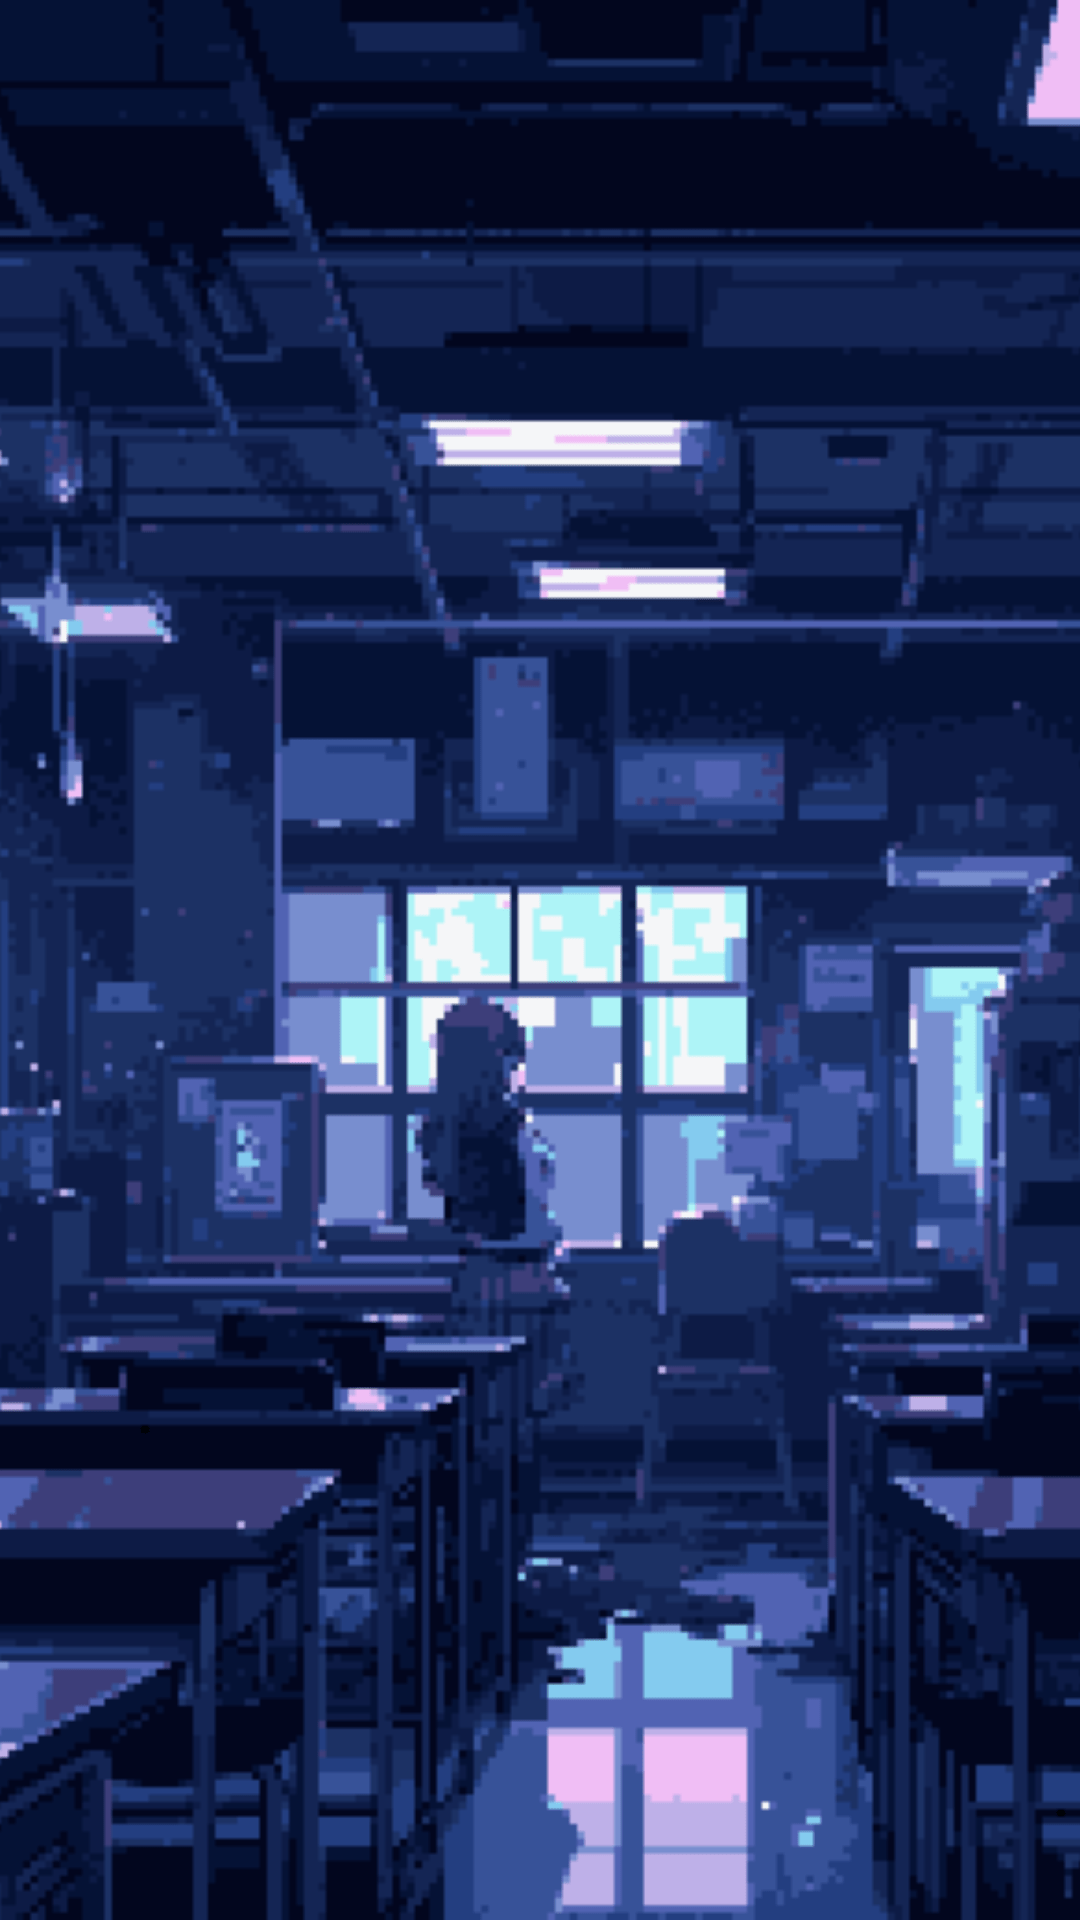 girl in the science room at night